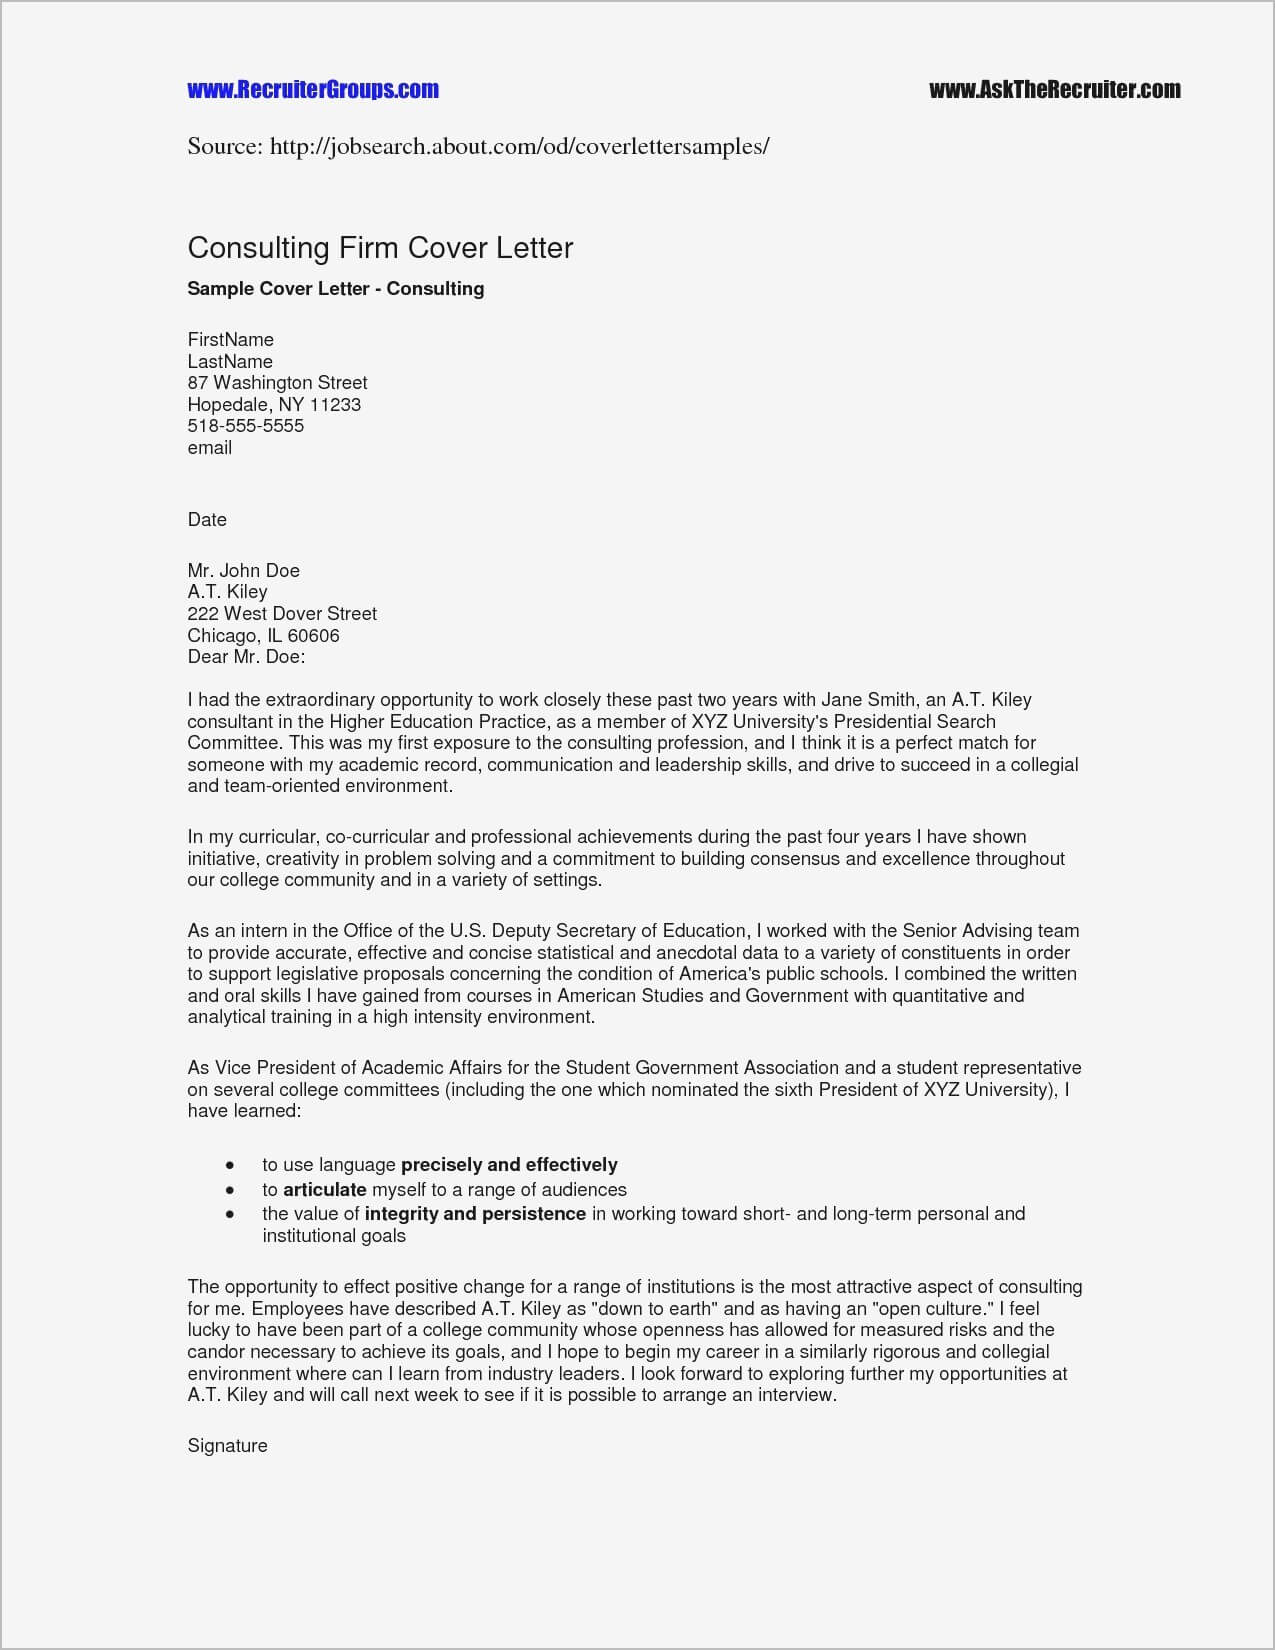 Business Letter Templates Microsoft Word – Major.magdalene Pertaining To Microsoft Word Business Letter Template